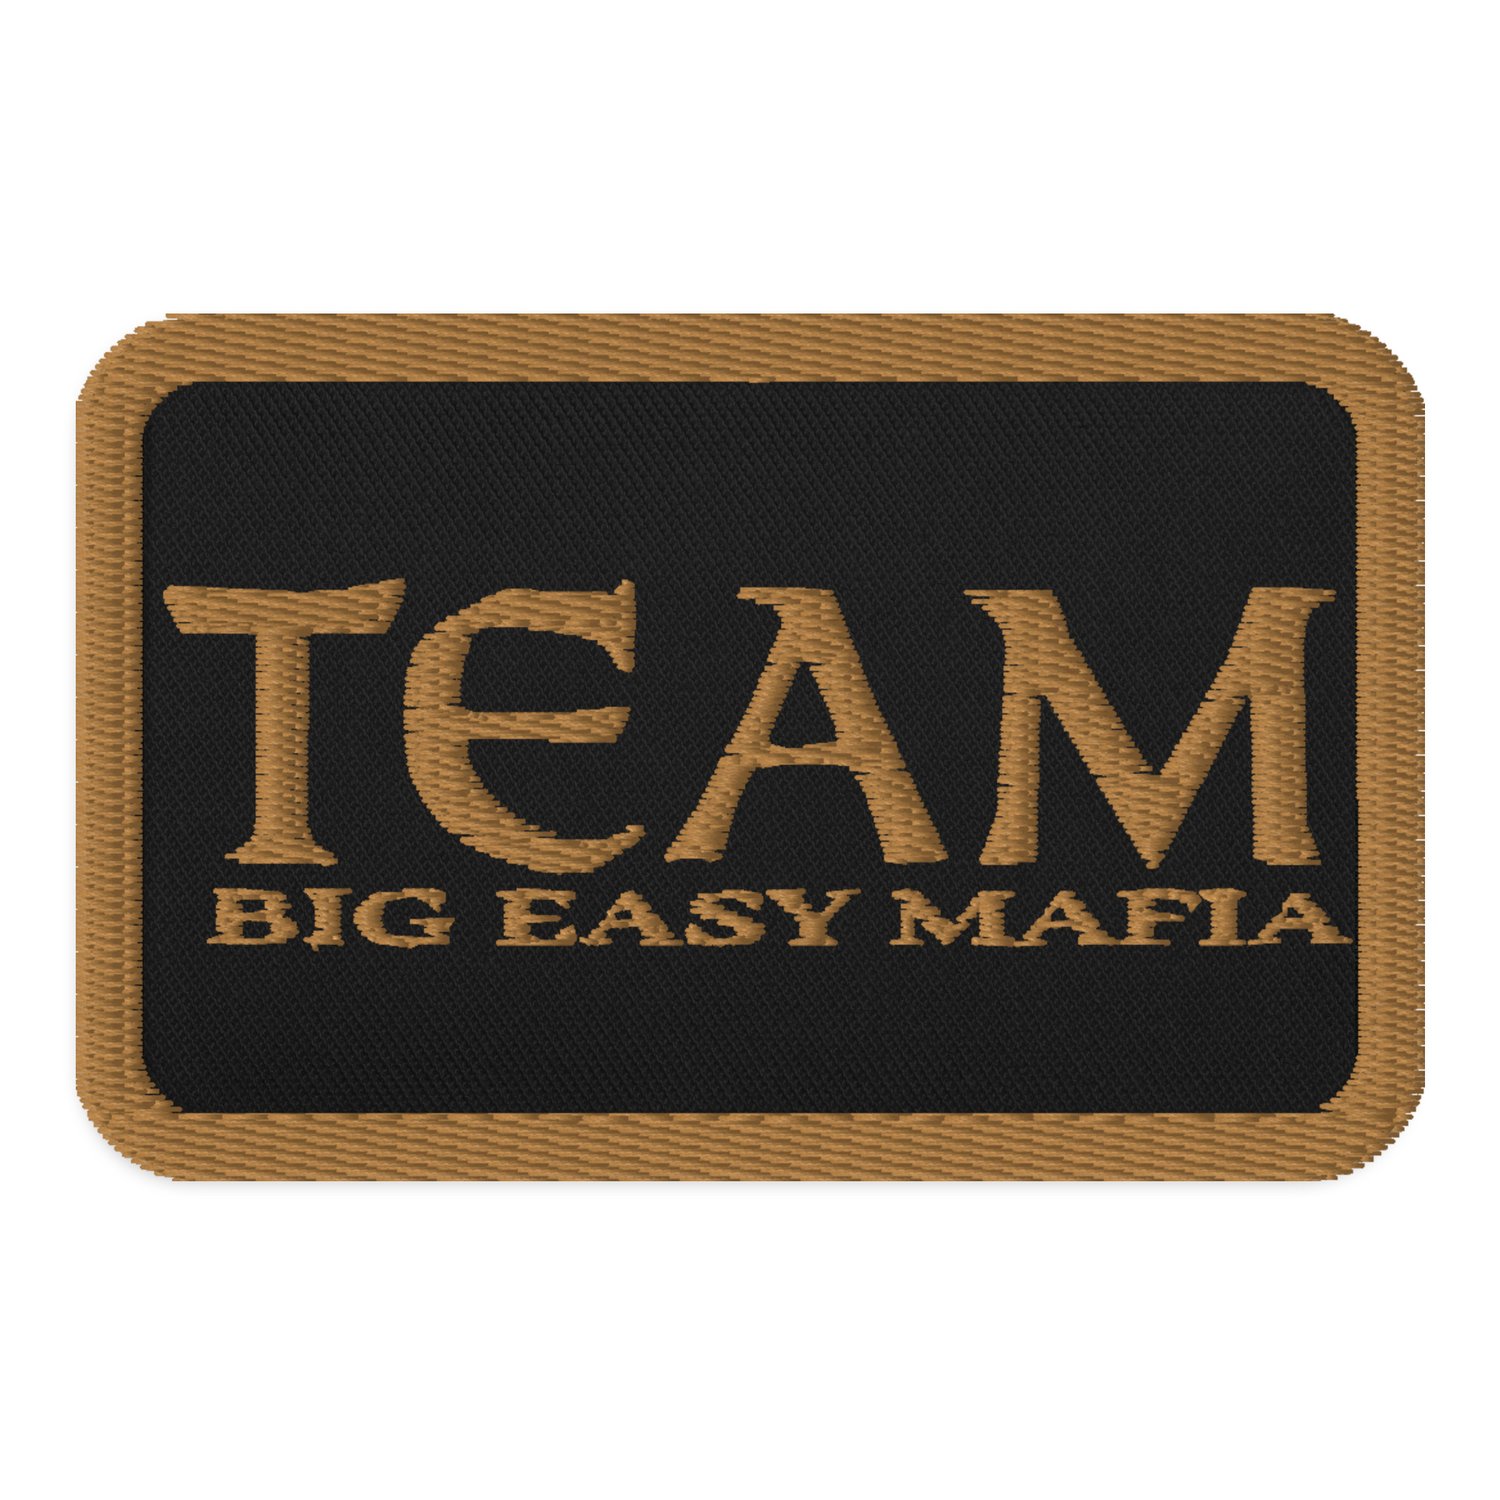 Image of TEAM BIG EASY MAFIA Embroidered patches